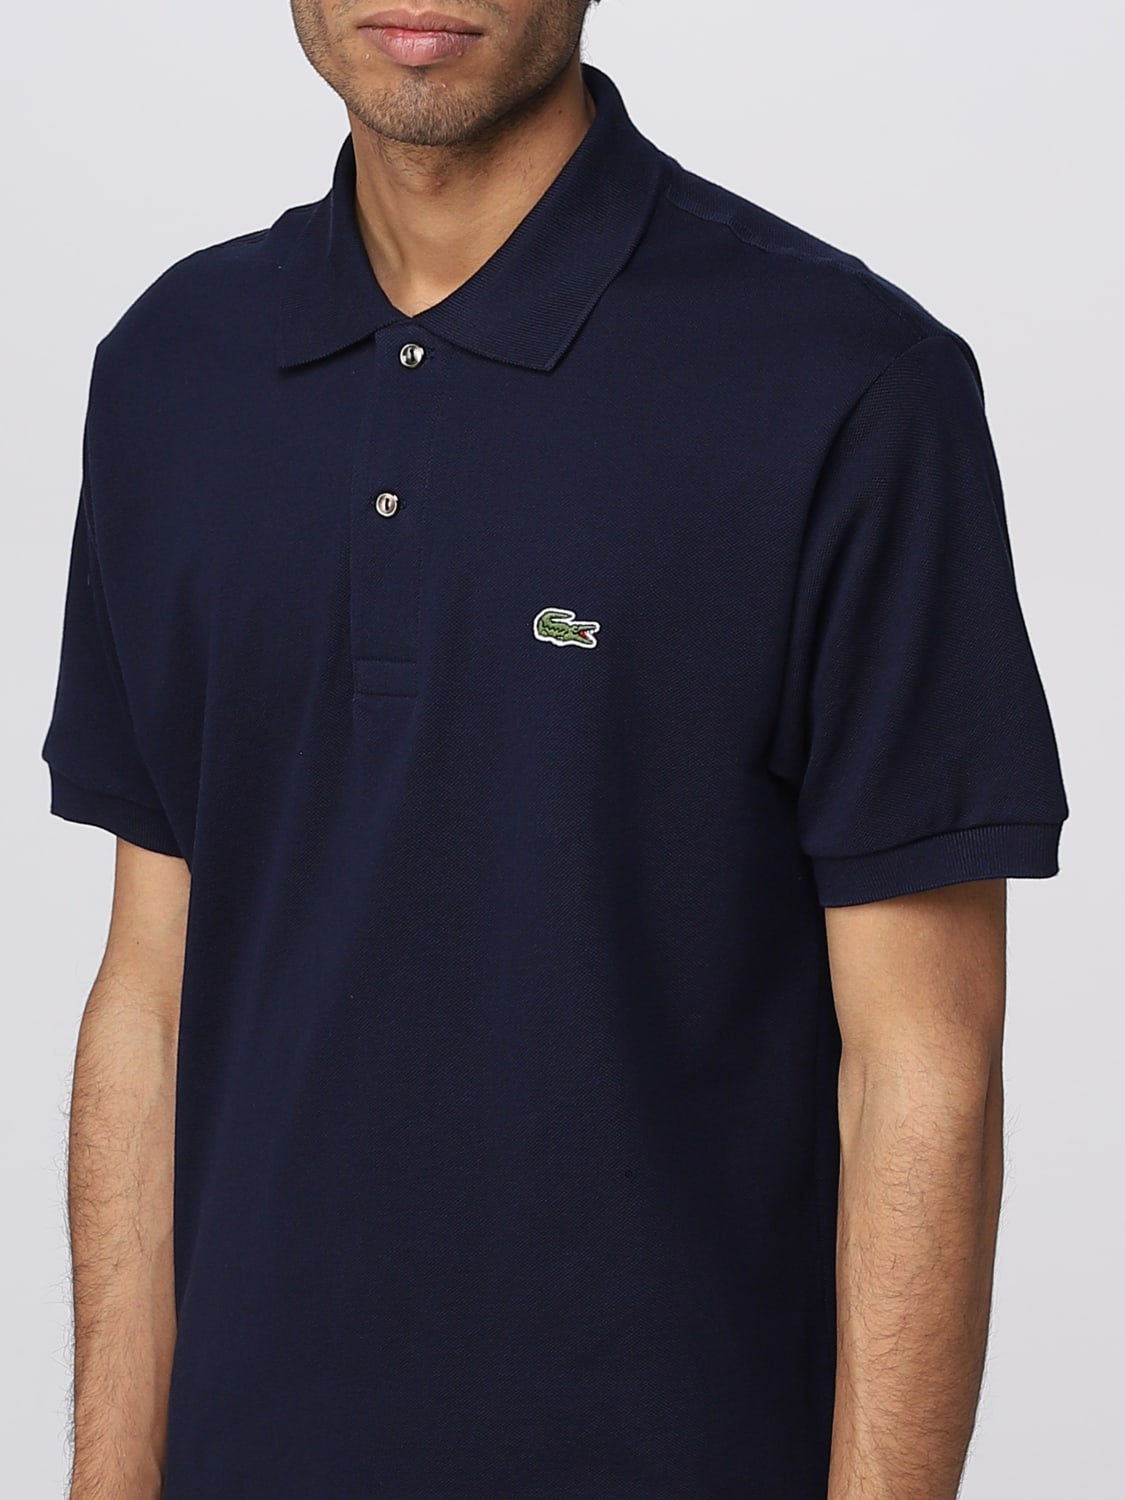 for shirt Lacoste polo at Lacoste Navy Outlet: | shirt online L1212 polo - man